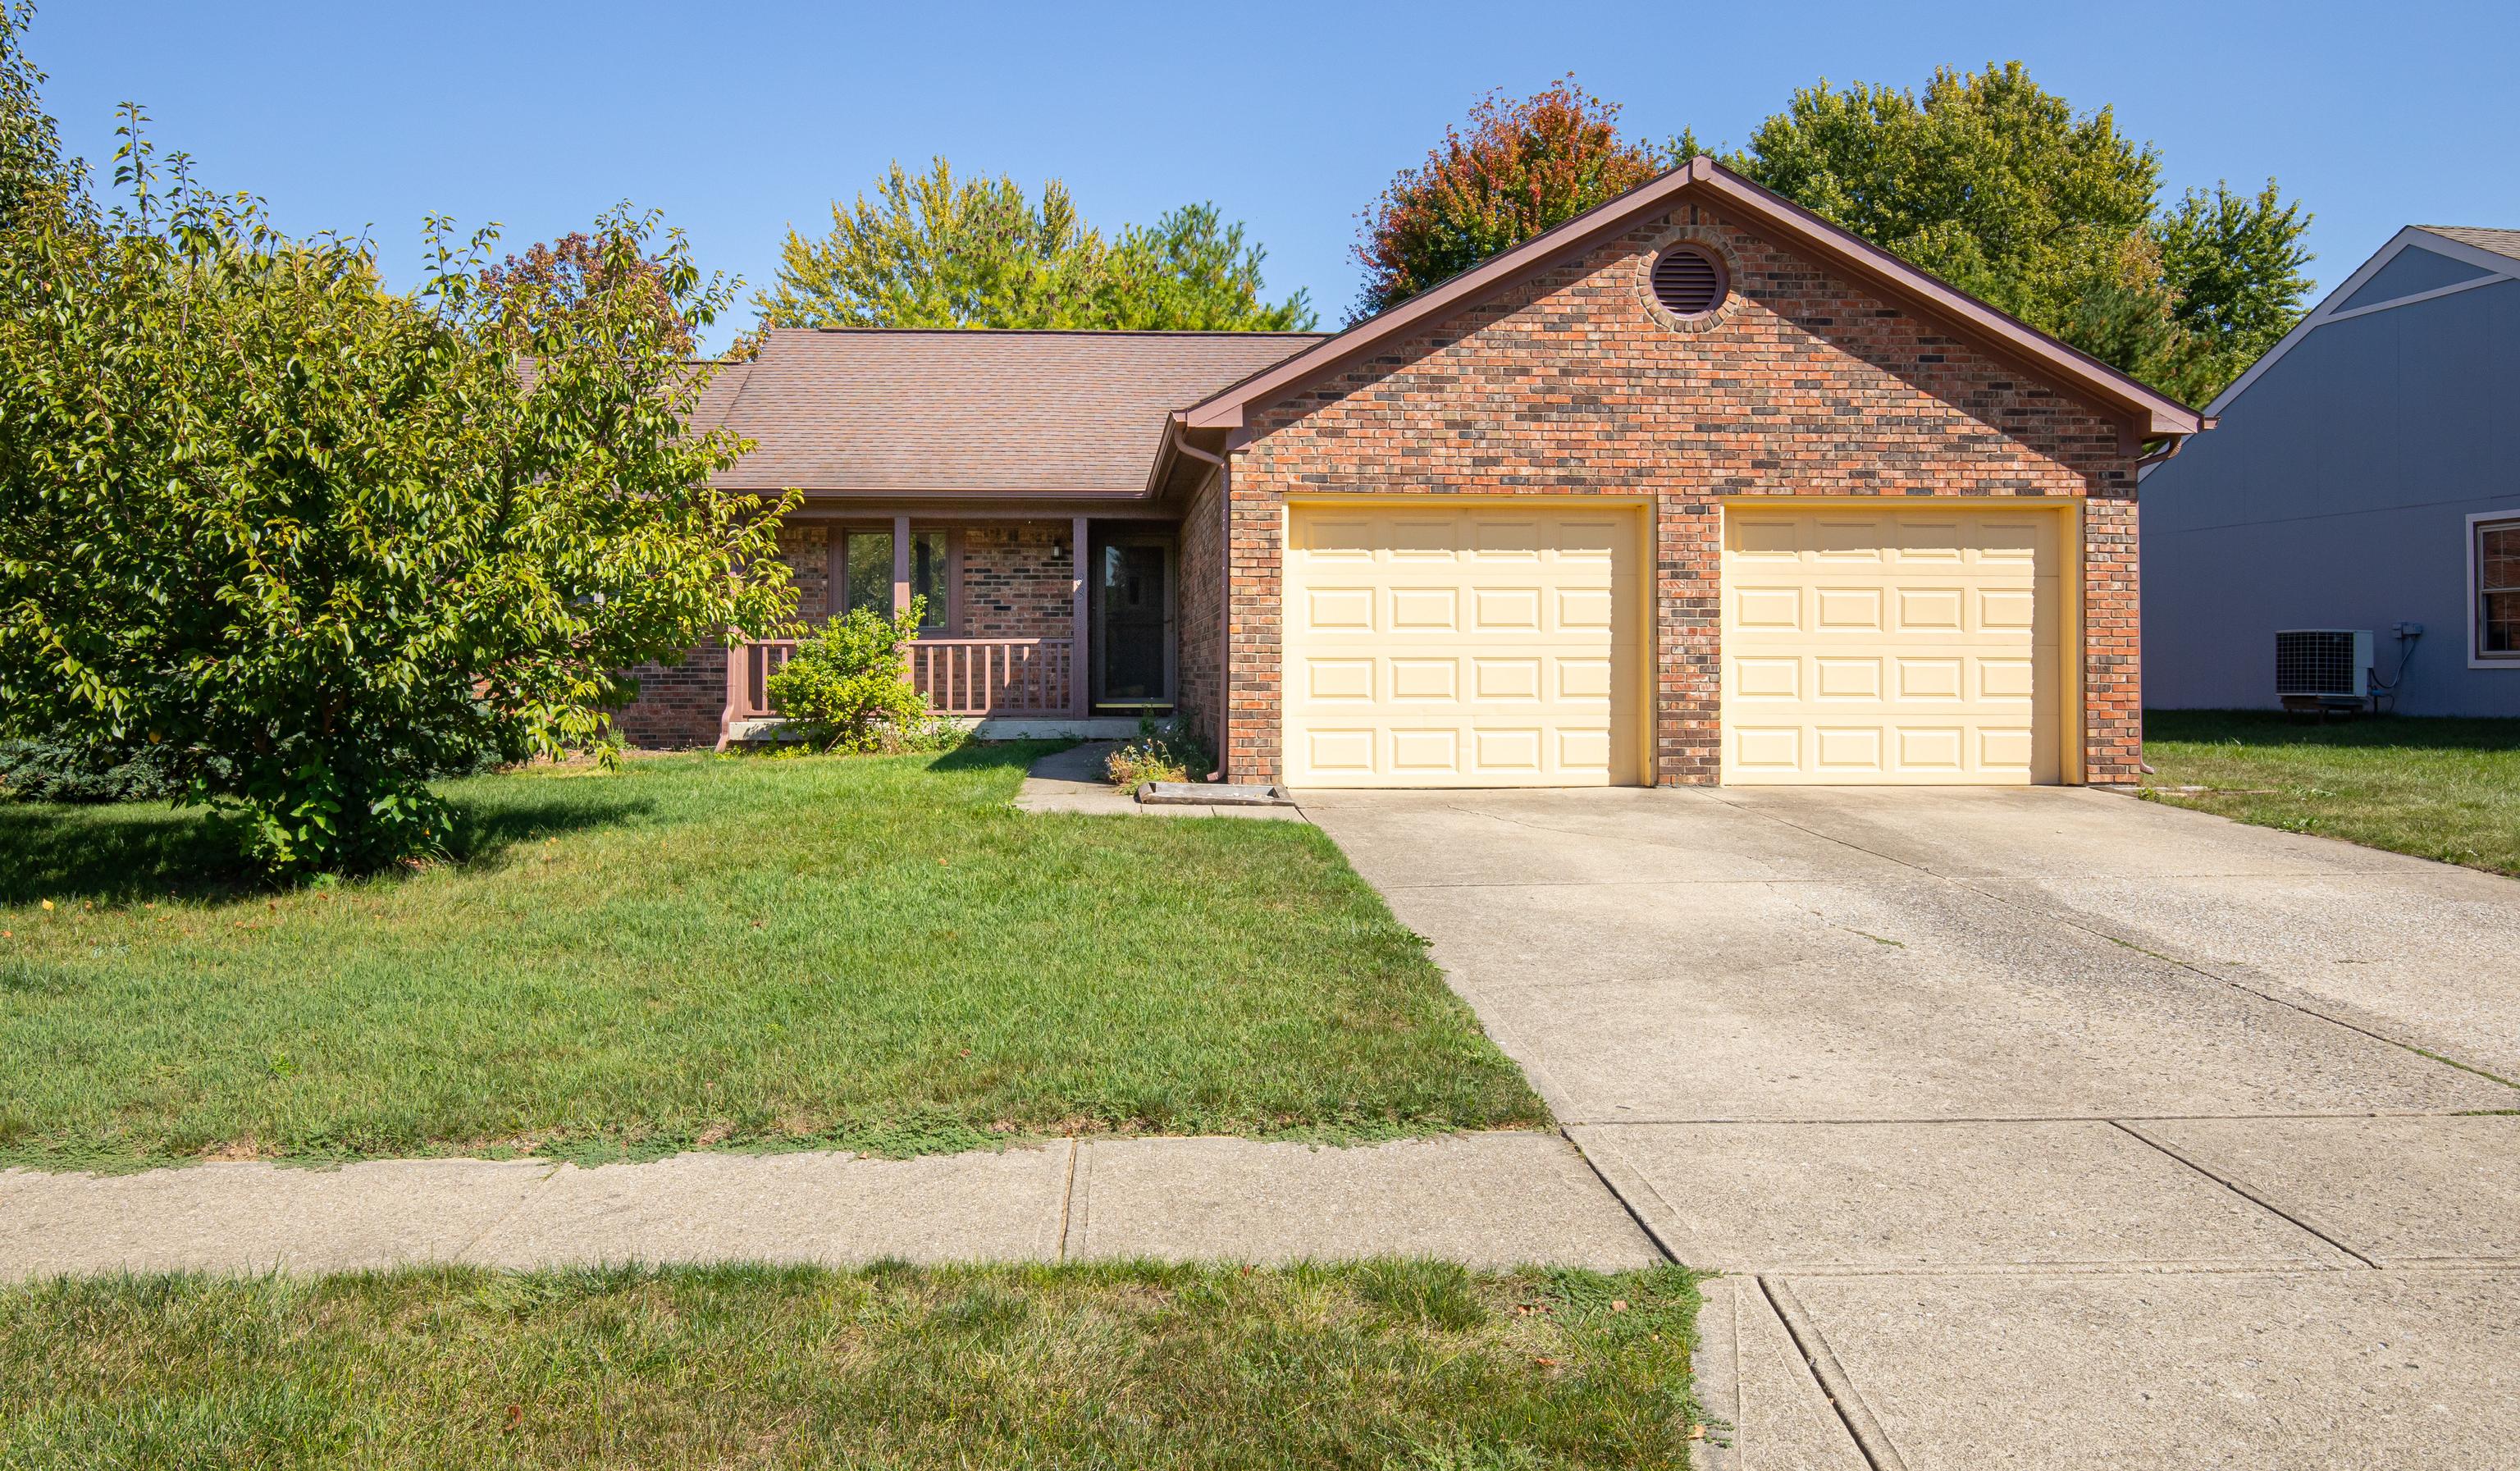 Photo one of 8811 Country Walk Dr Indianapolis IN 46227 | MLS 21946585